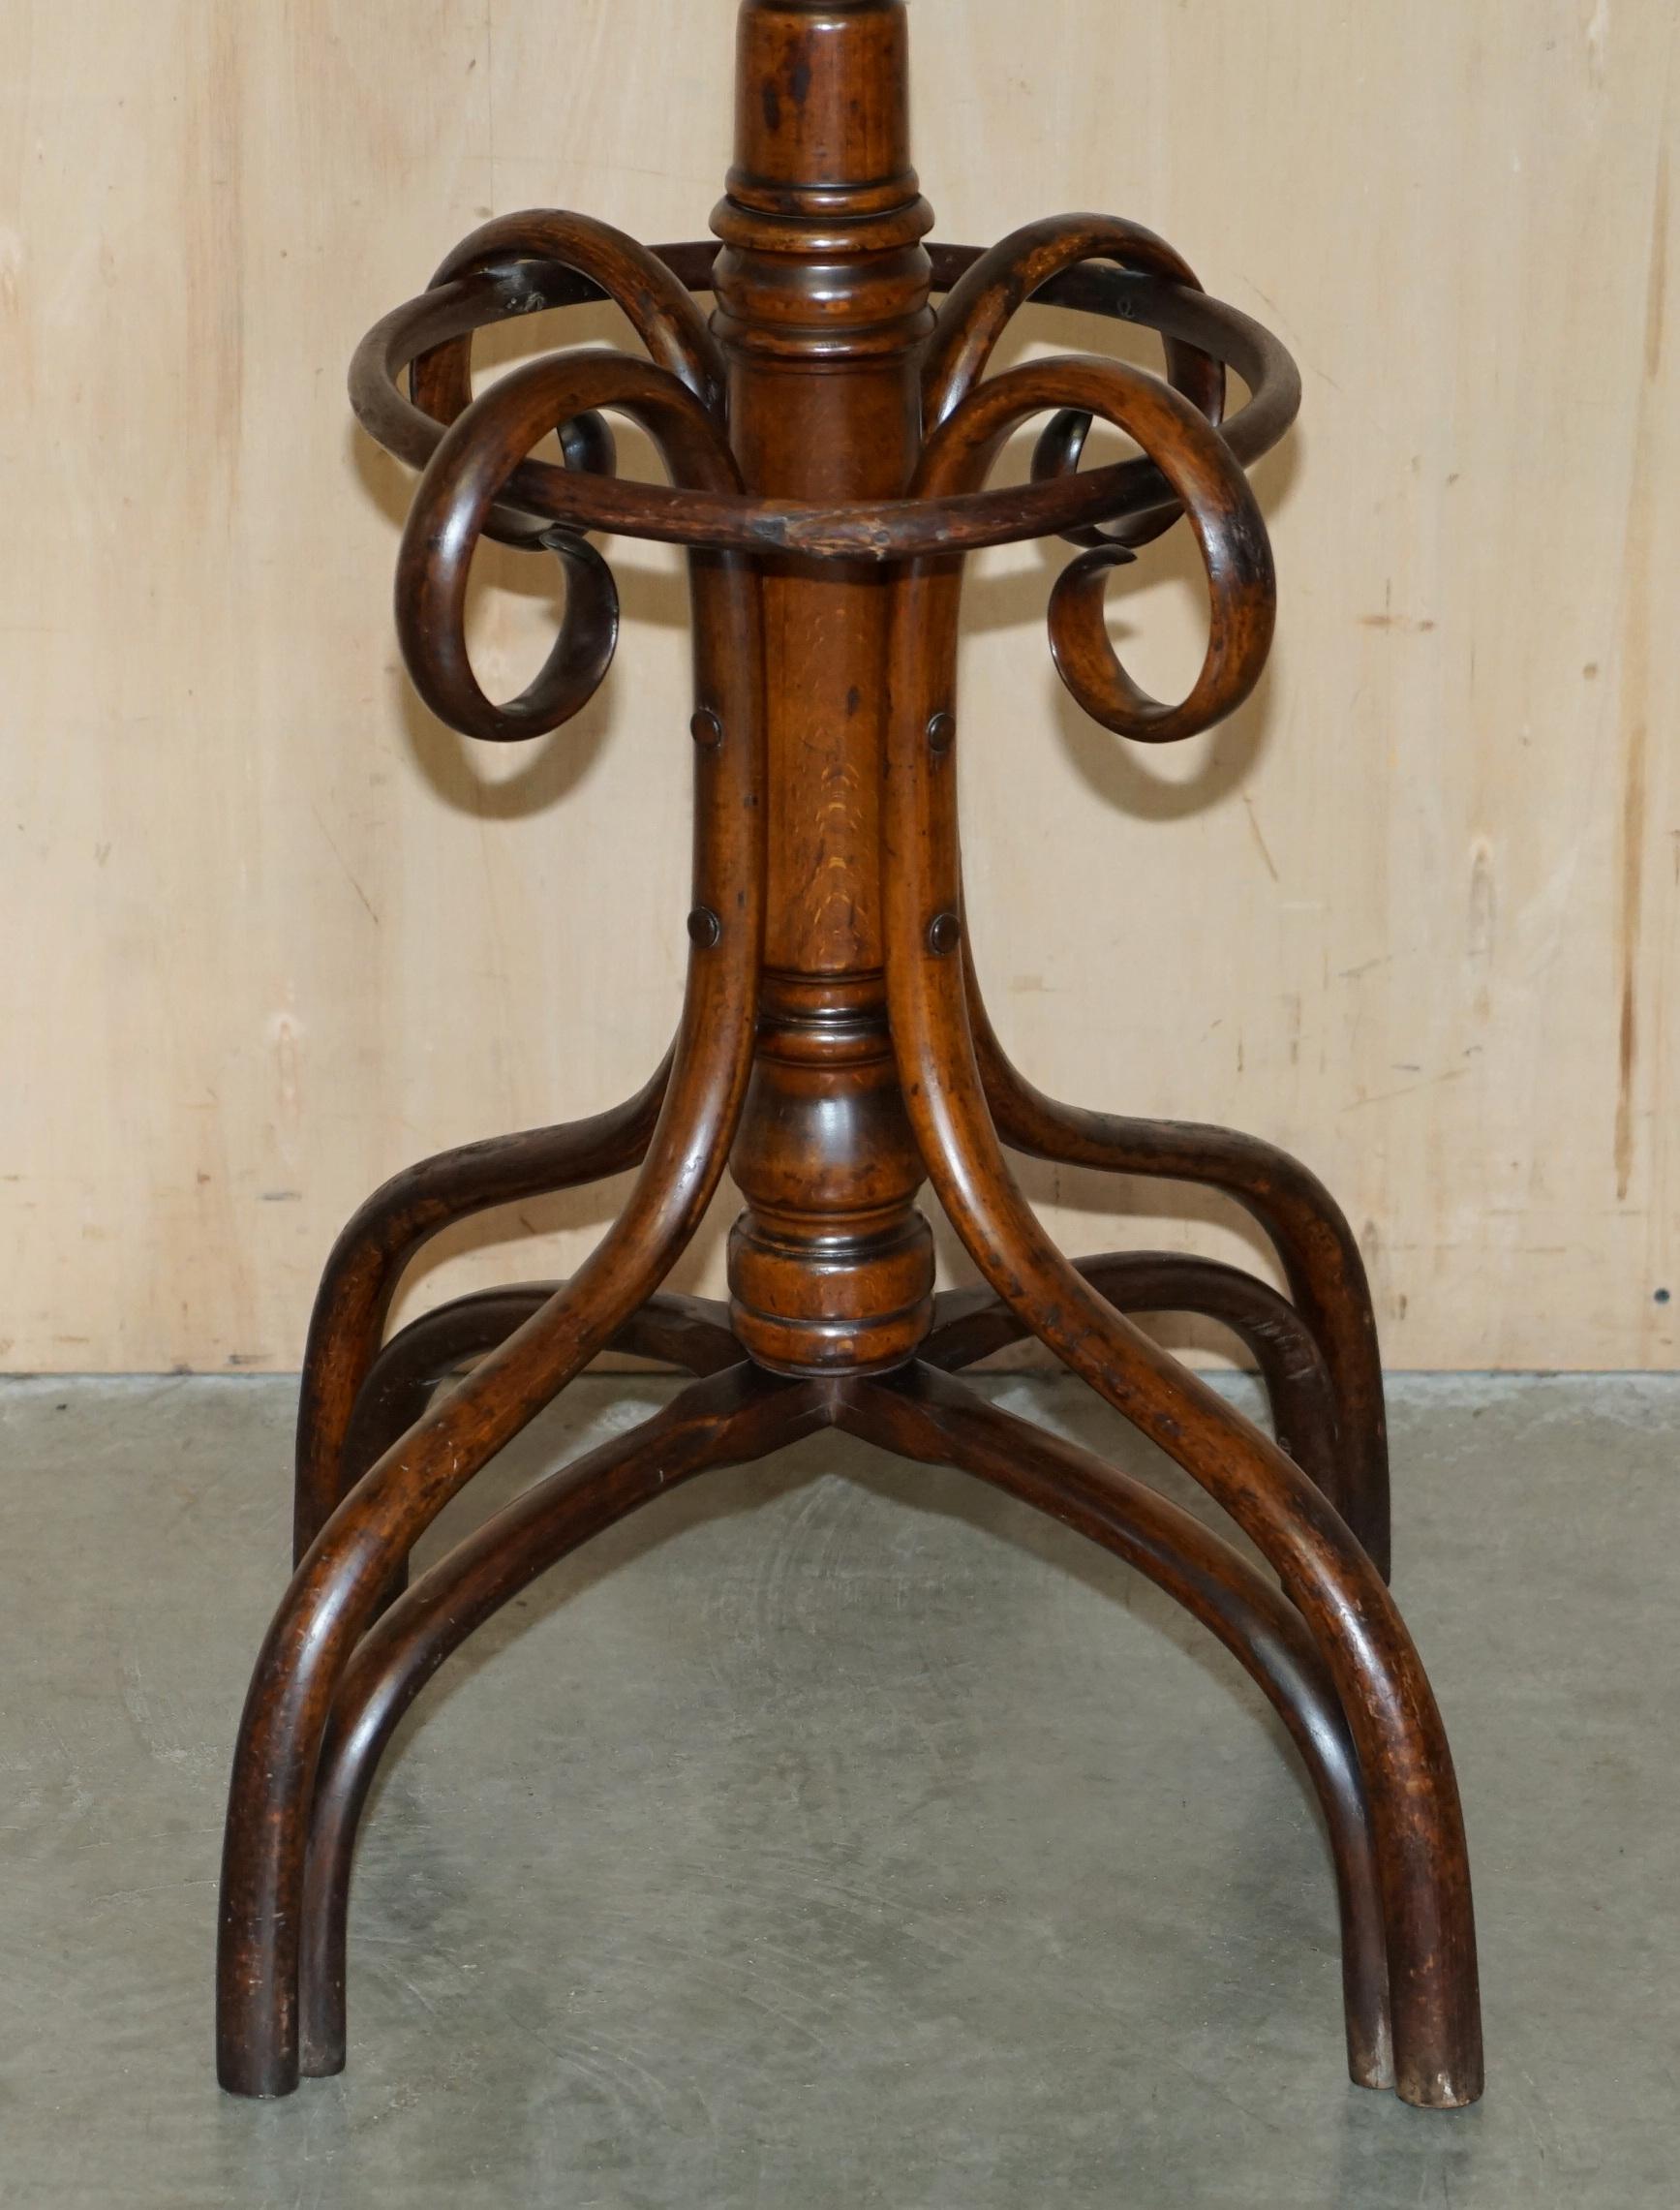 Royal House Antiques

Royal House Antiques is delighted to offer for sale this super rare, antique original, circa 1880, extra large, Thonet Bentwood solid Beech wood eight prong coat stand / rack

Please note the delivery fee listed is just a